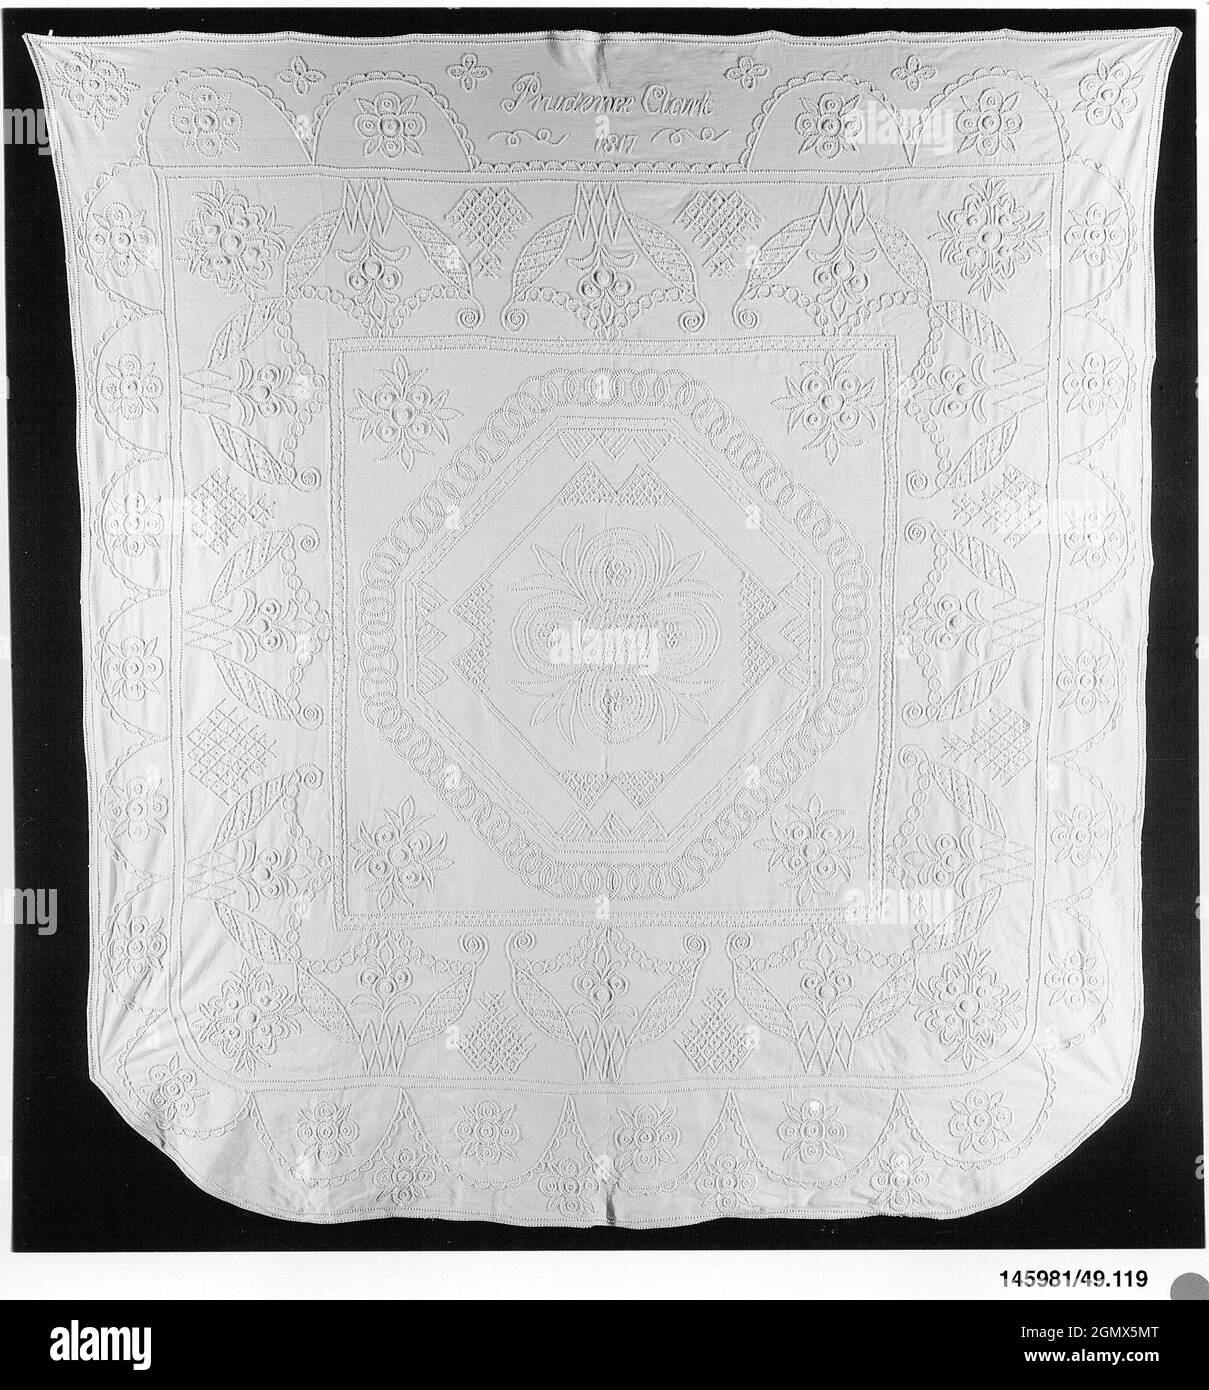 Embroidered whitework coverlet. Maker: Prudence Clark; Date: 1817; Culture: American; Medium: Cotton/linen embroidered with cotton thread; Stock Photo